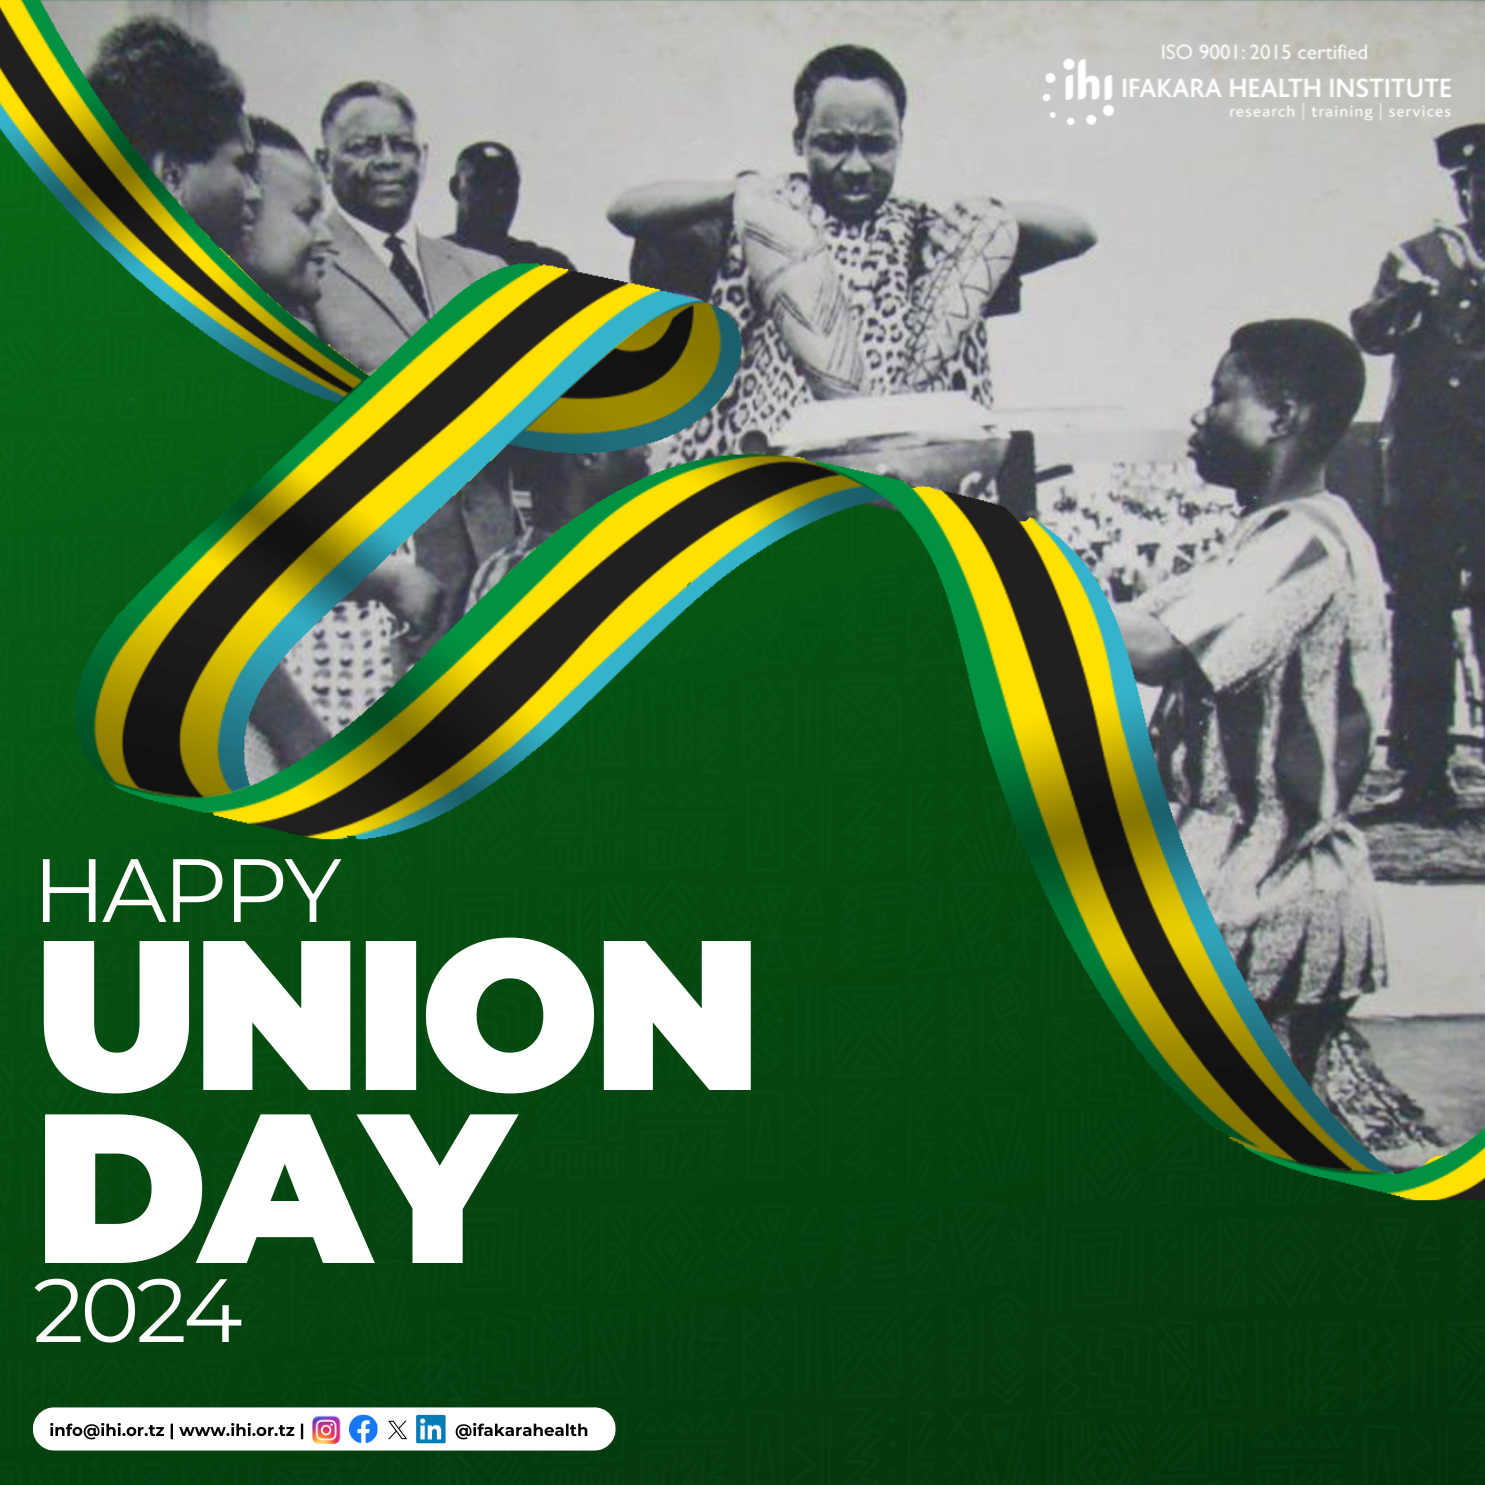 COMMEMORATION: It’s Union Day today – Tanzania turns 60!